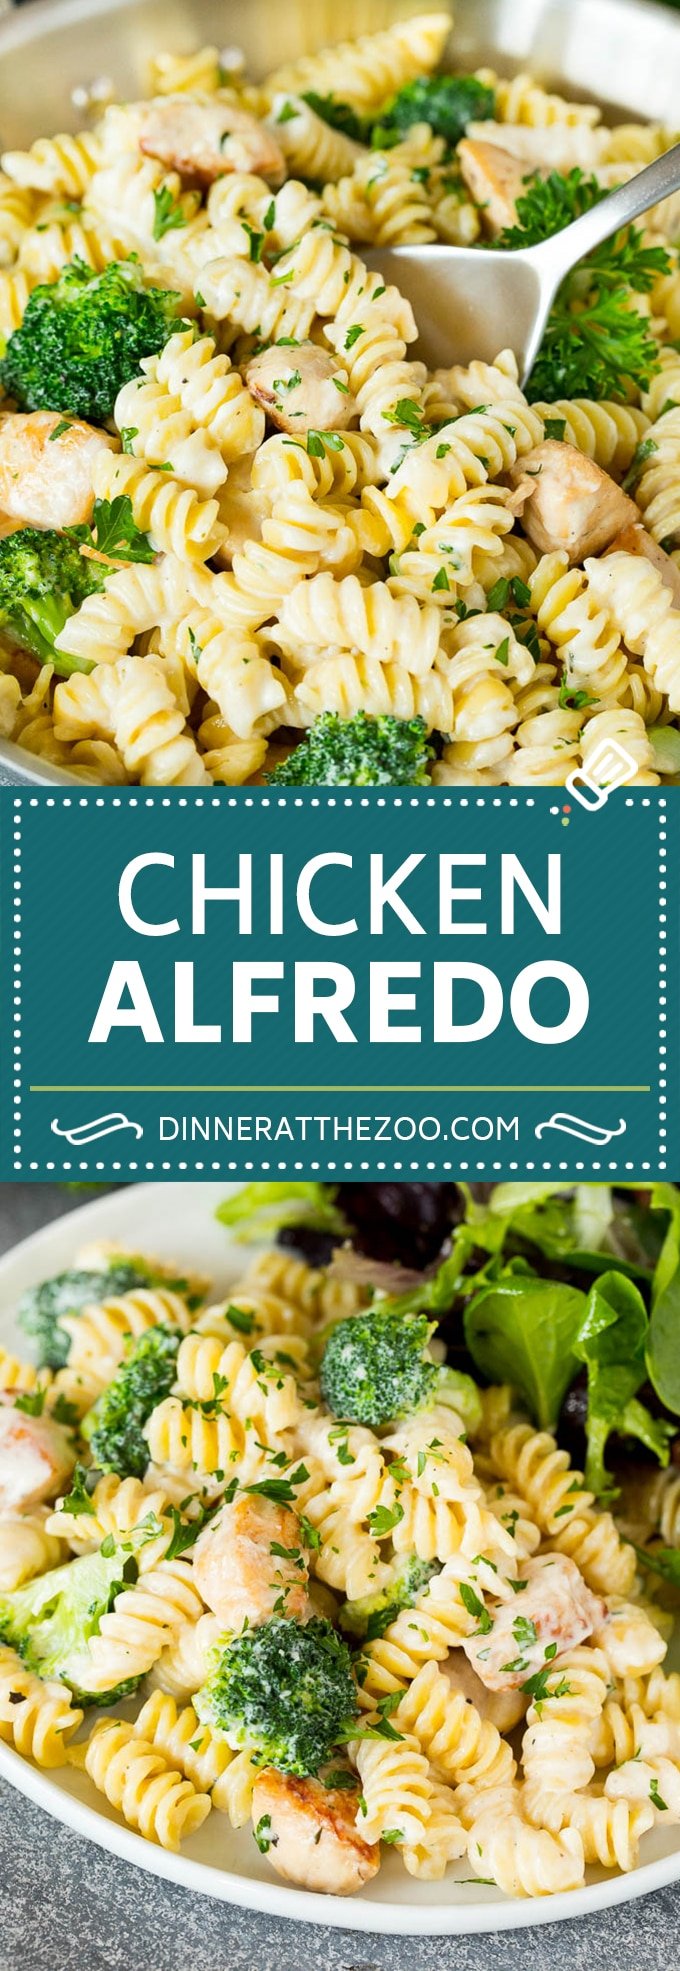 This chicken broccoli Alfredo pasta is sauteed chicken breast pieces and fresh broccoli, all tossed in a homemade creamy sauce.